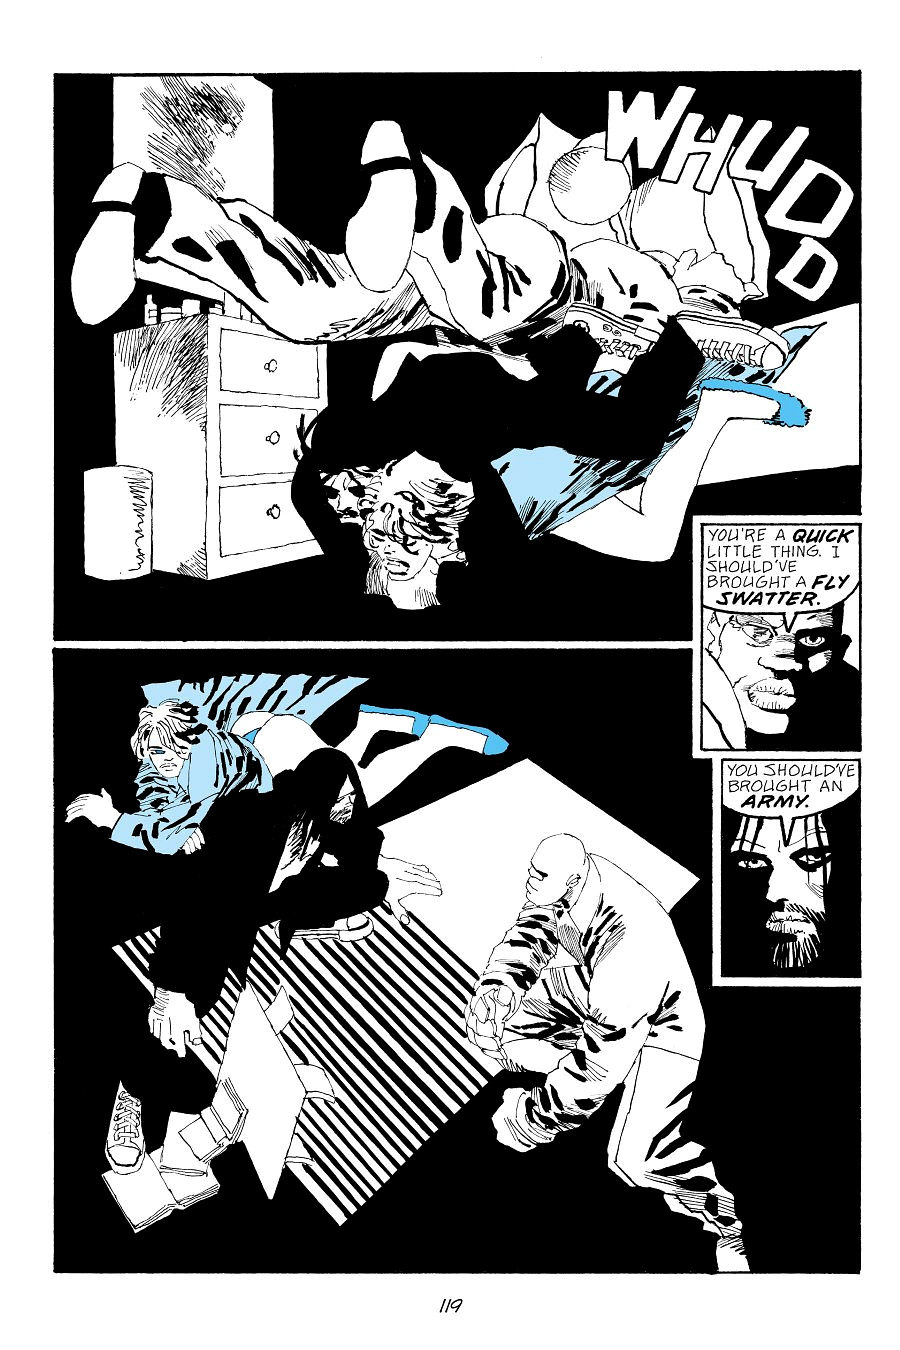 page 119 of sin city 7 hell and back